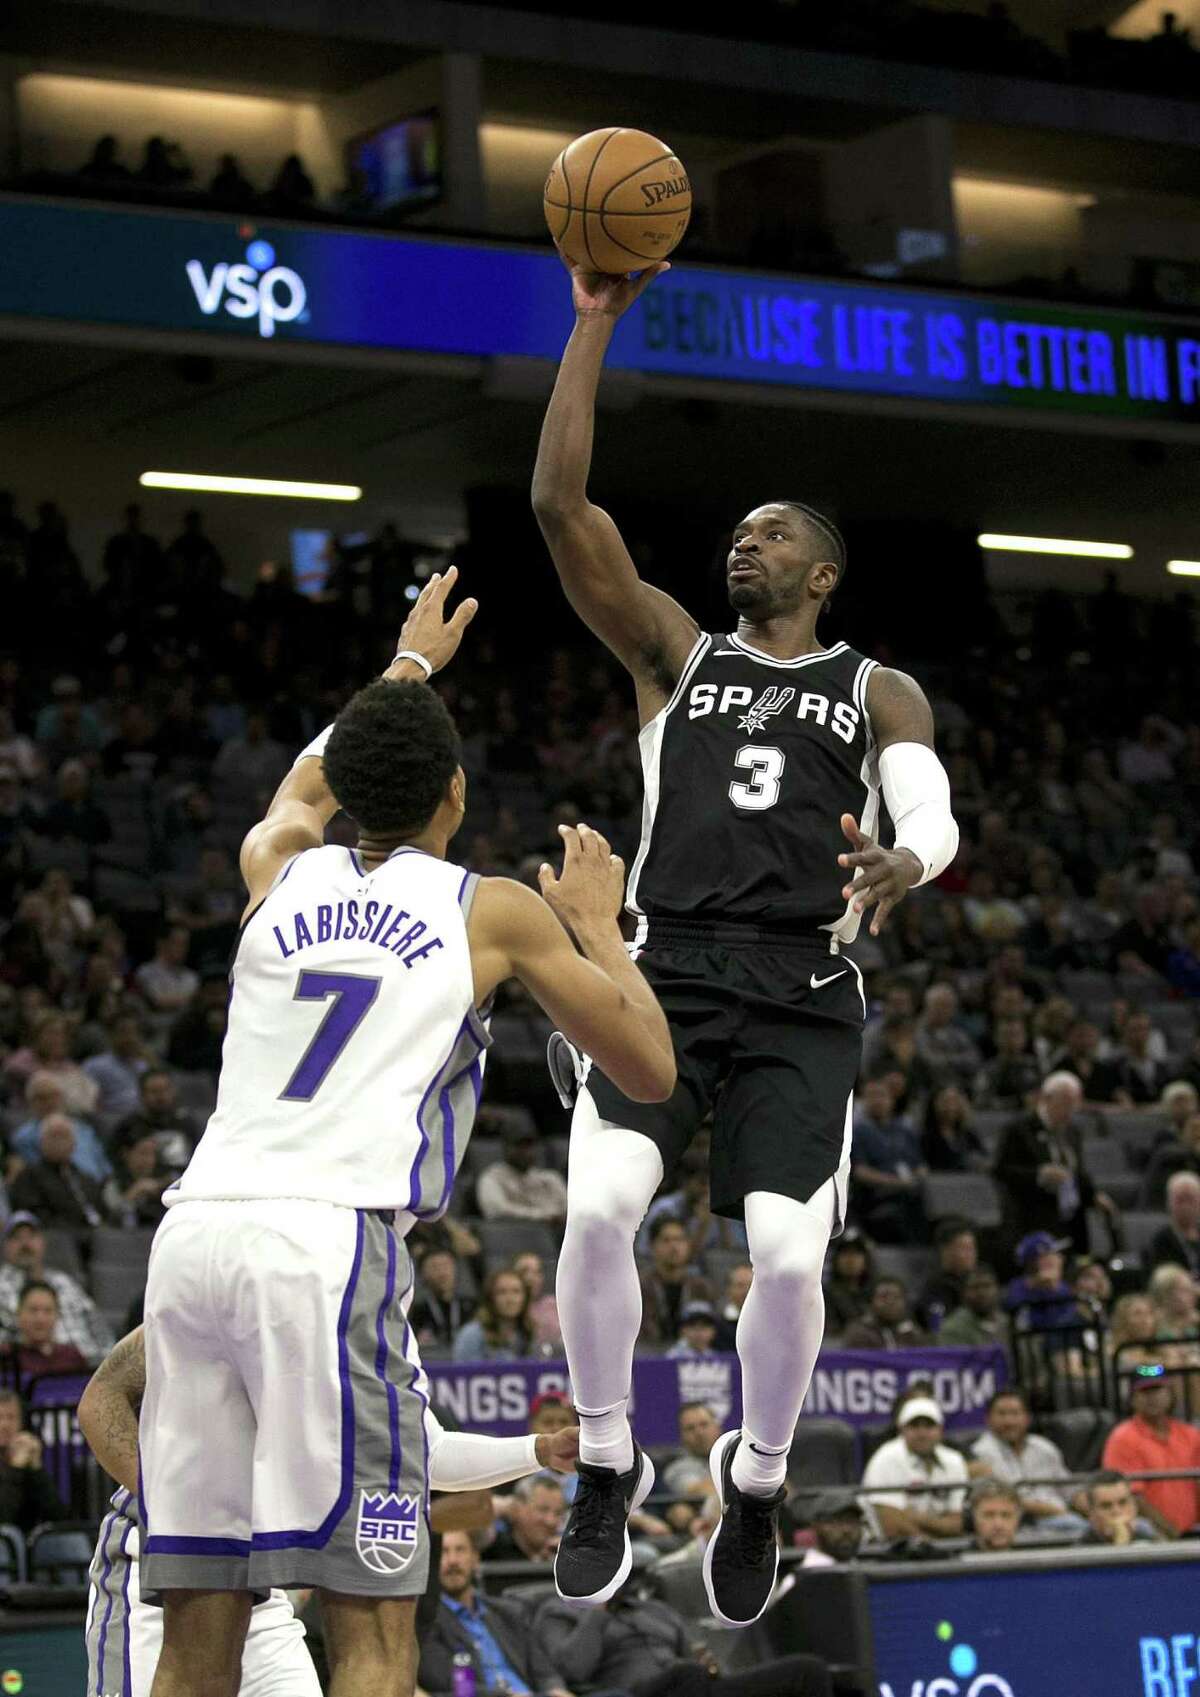 Spurs guard Brandon Paul goes to the basket against the King forward Skal Labissiere during the second half of a preseason game on Oct. 2, 2017, in Sacramento, Calif.